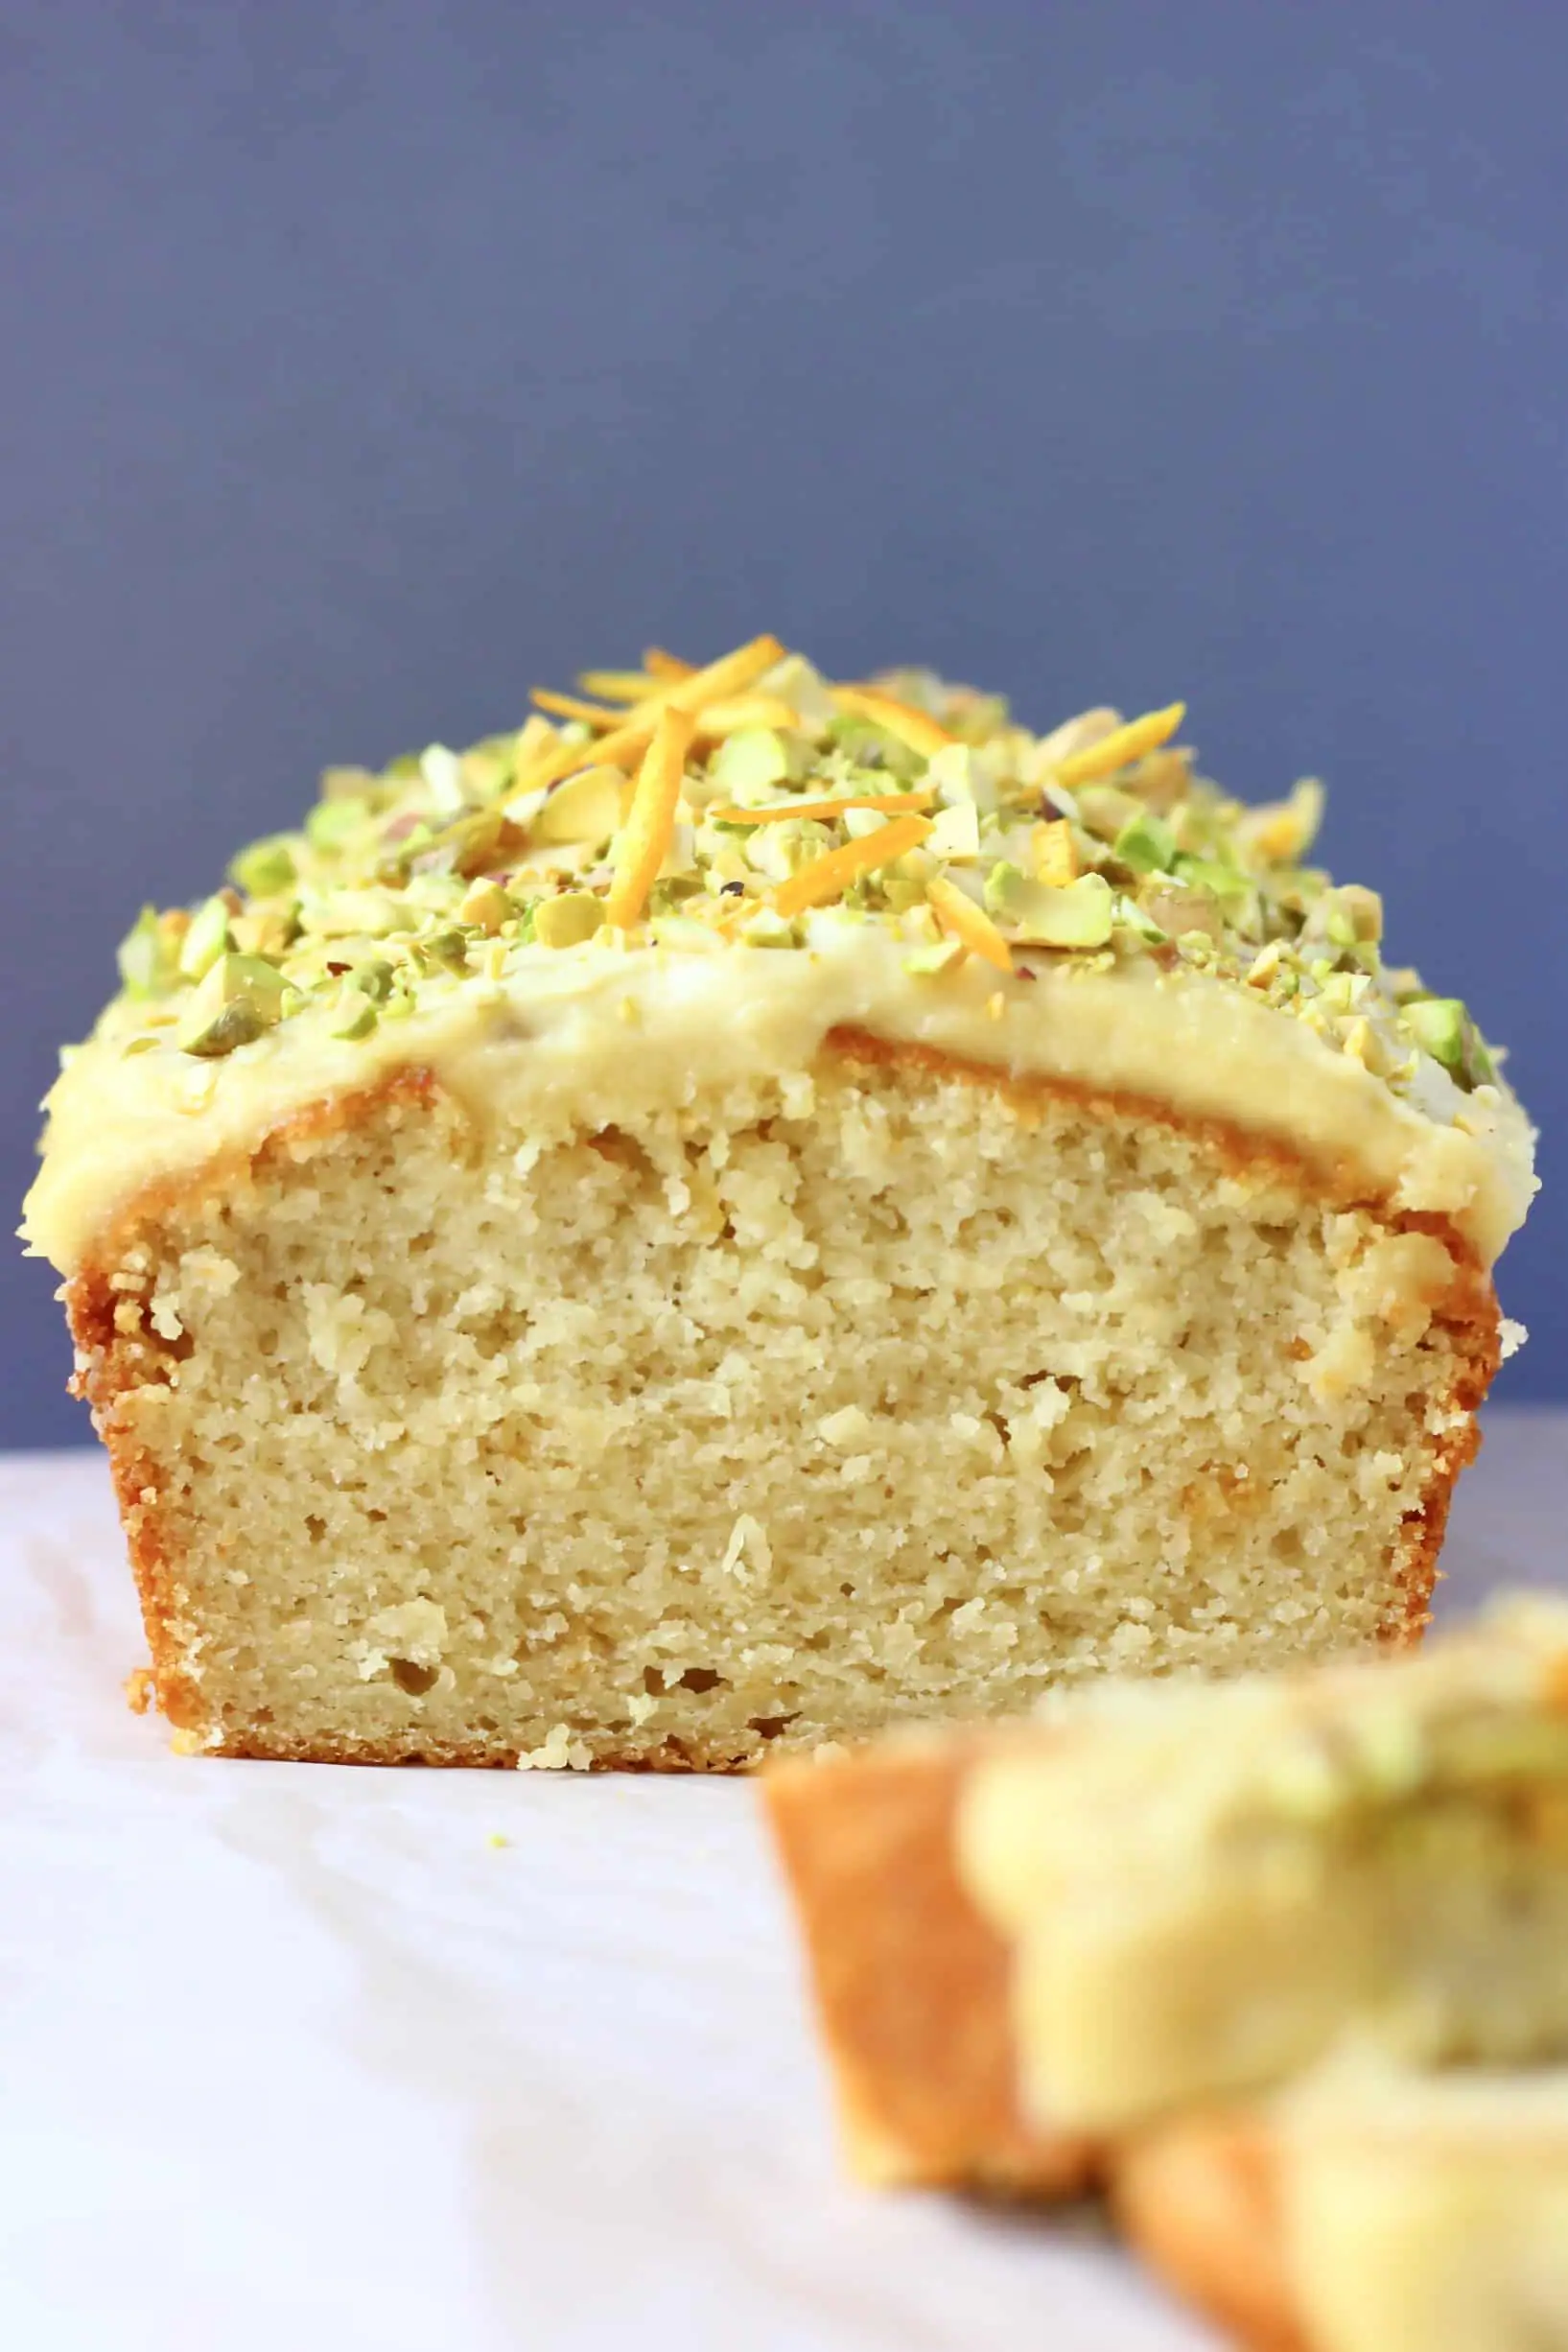 A loaf of vegan orange bread topped with frosting and chopped pistachios with two slices next to it